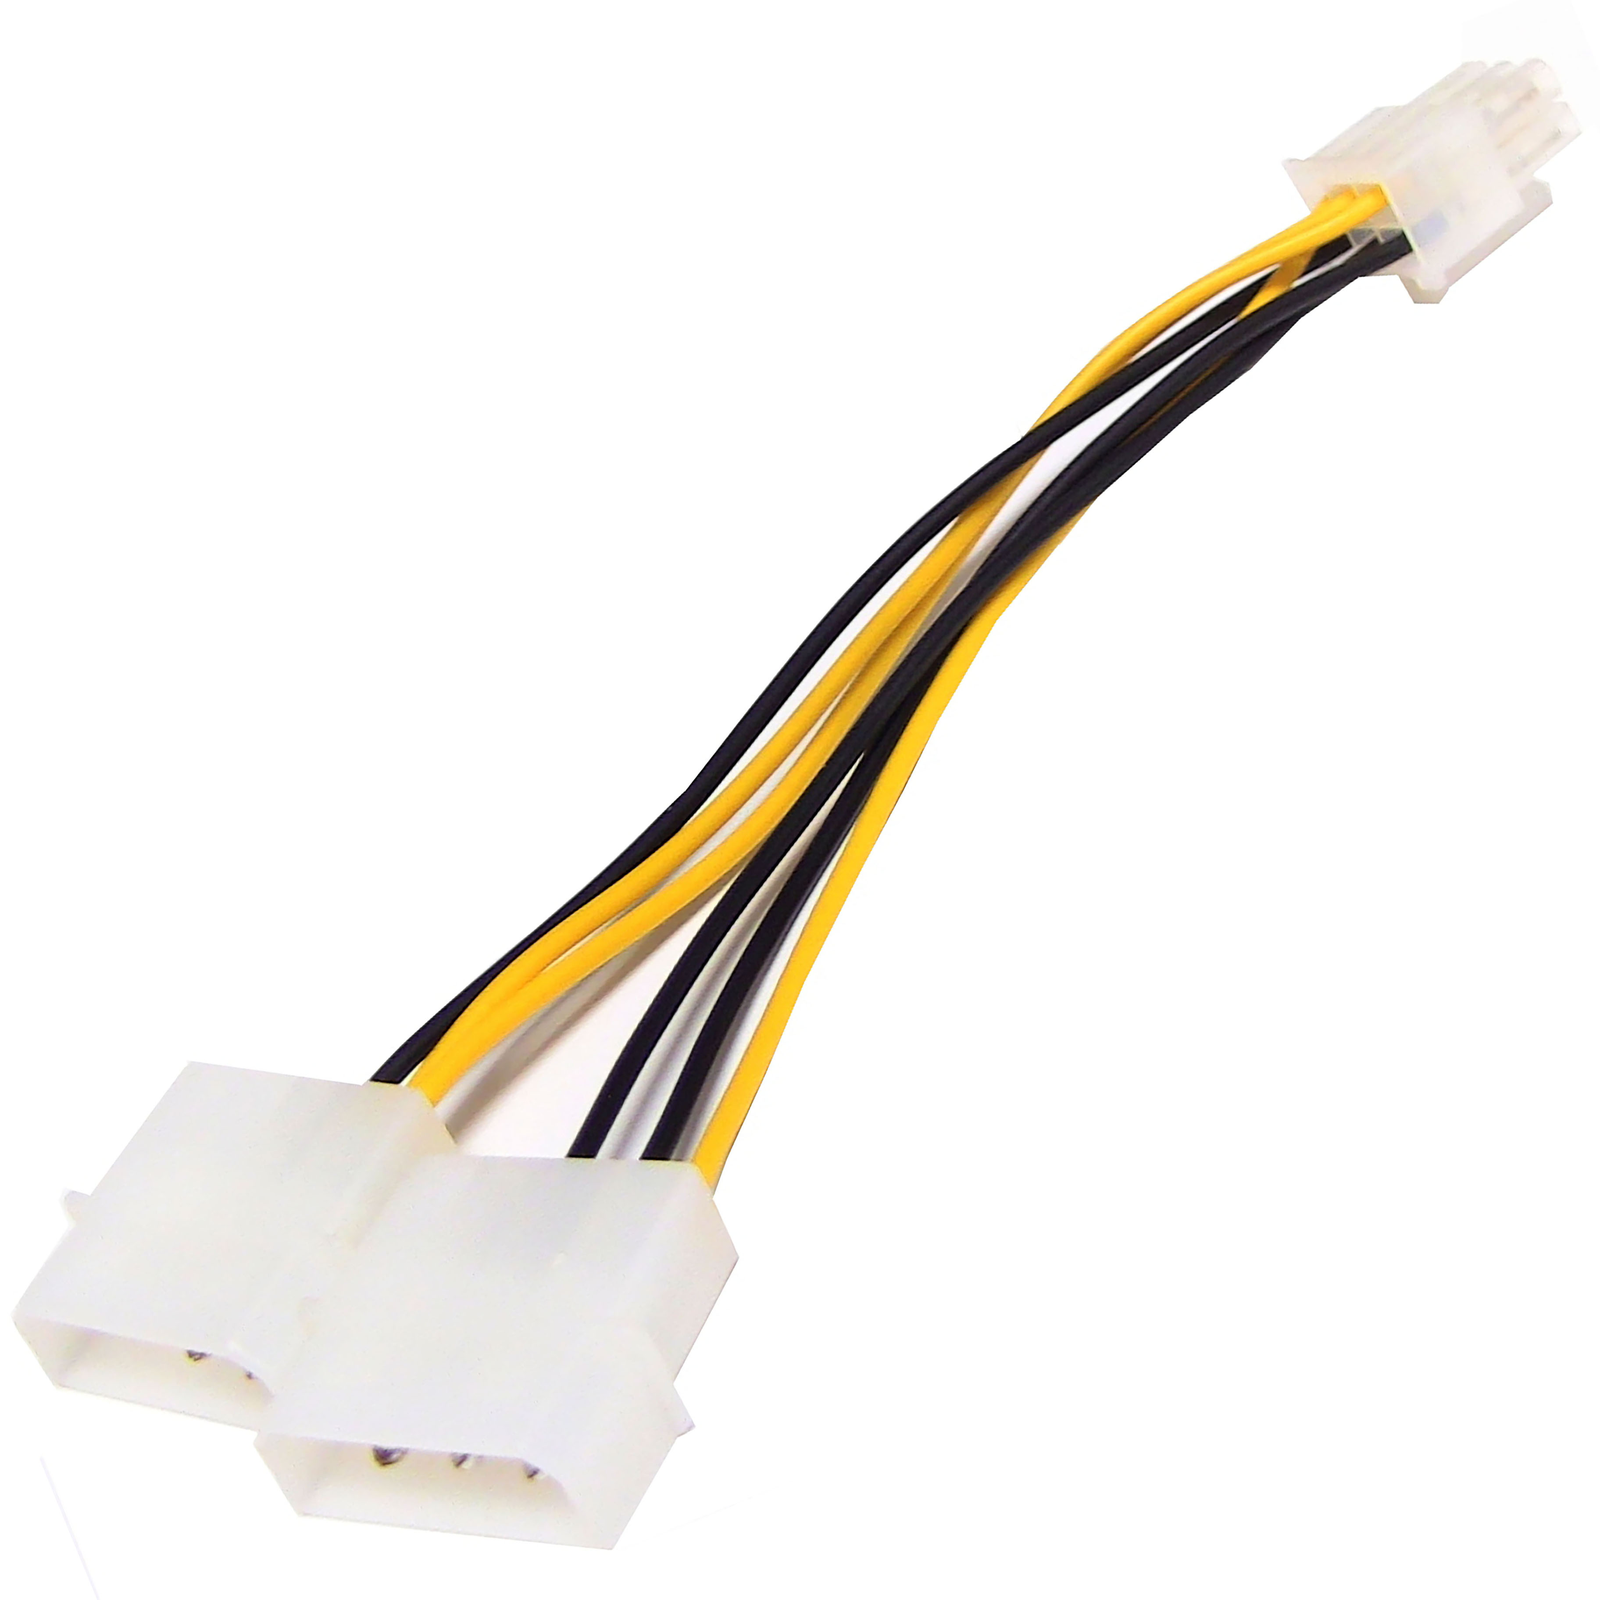 4 Pin Molex Male to 6 Pin PCI Express PCIE Female Power Adapter Cable Cord VN 